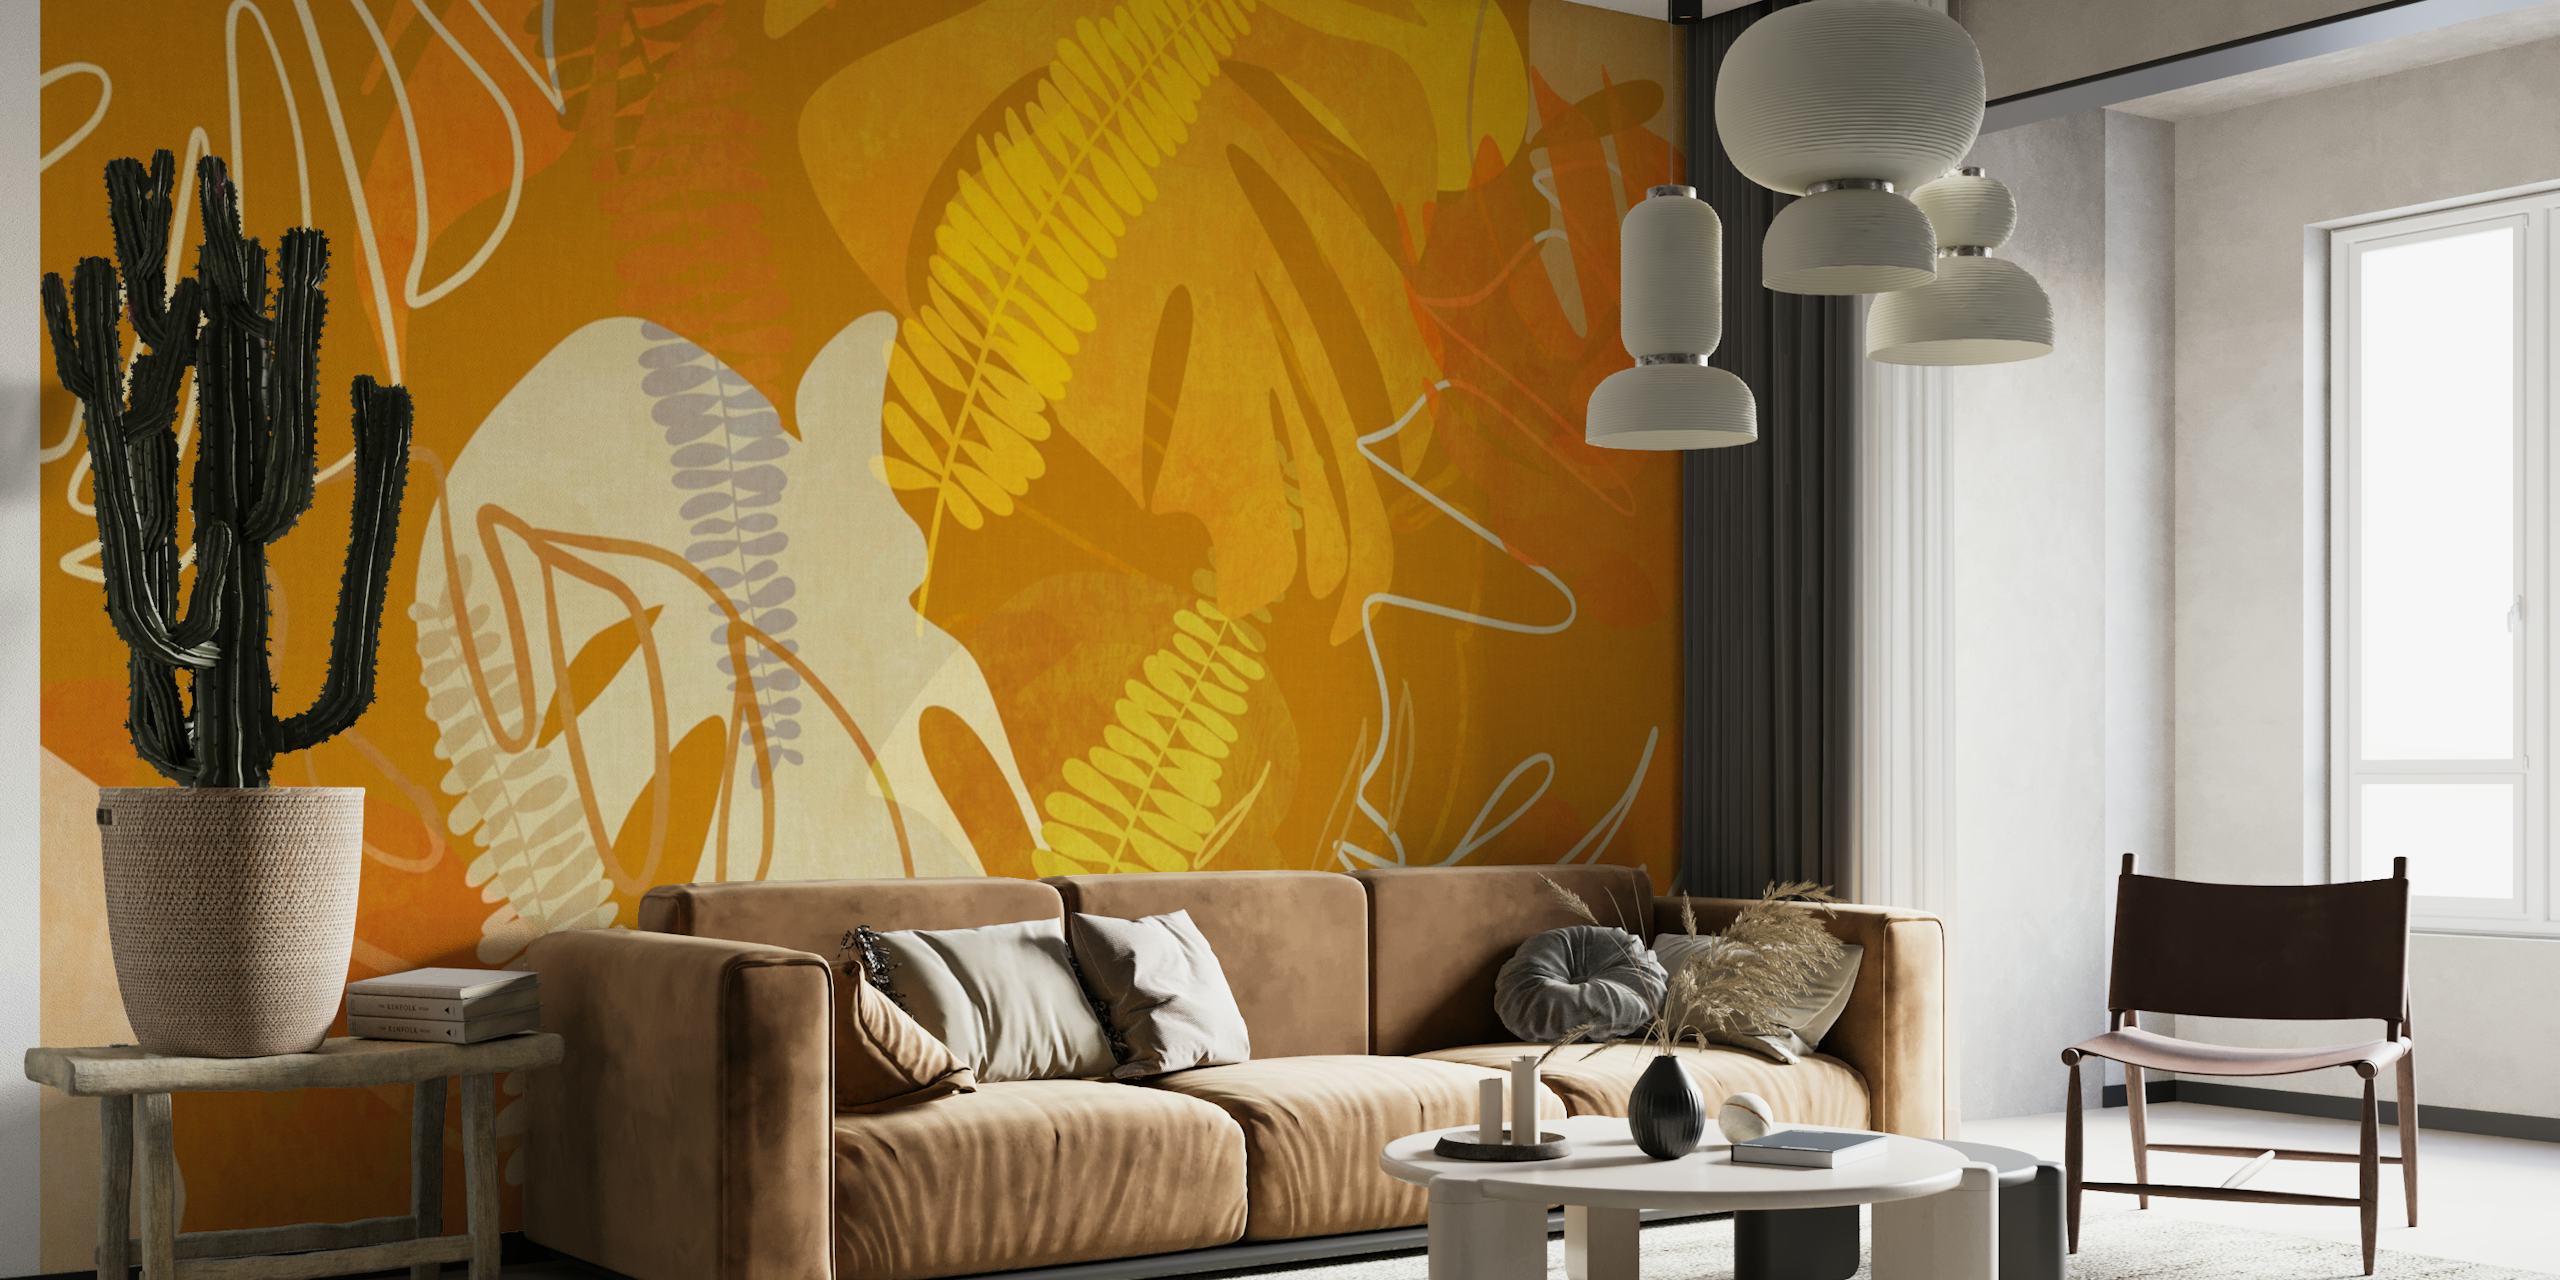 A wall mural with a leaves pattern in curry orange tones